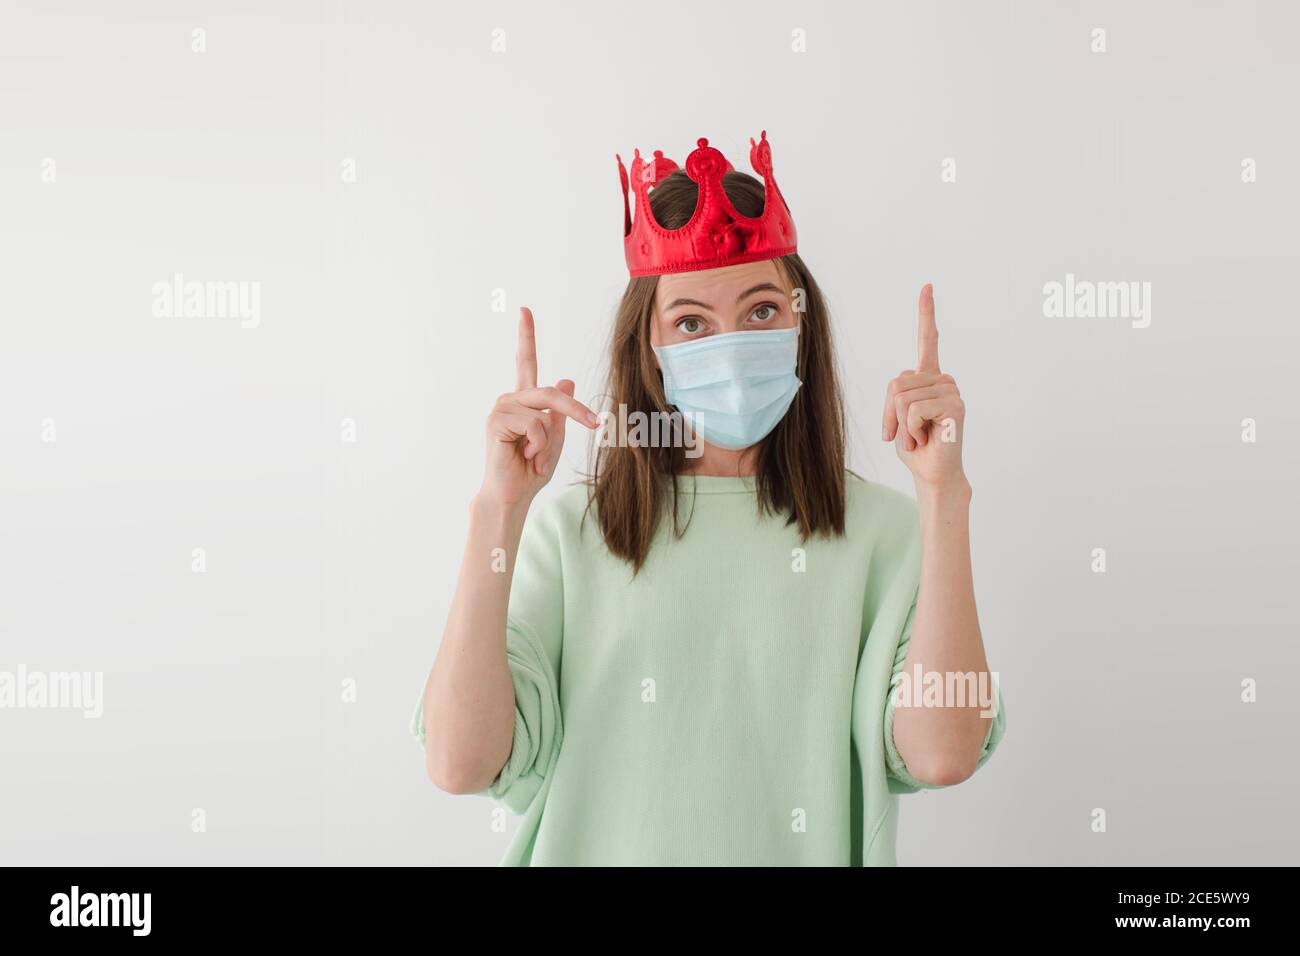 Woman in mask and crown pointing up Stock Photo